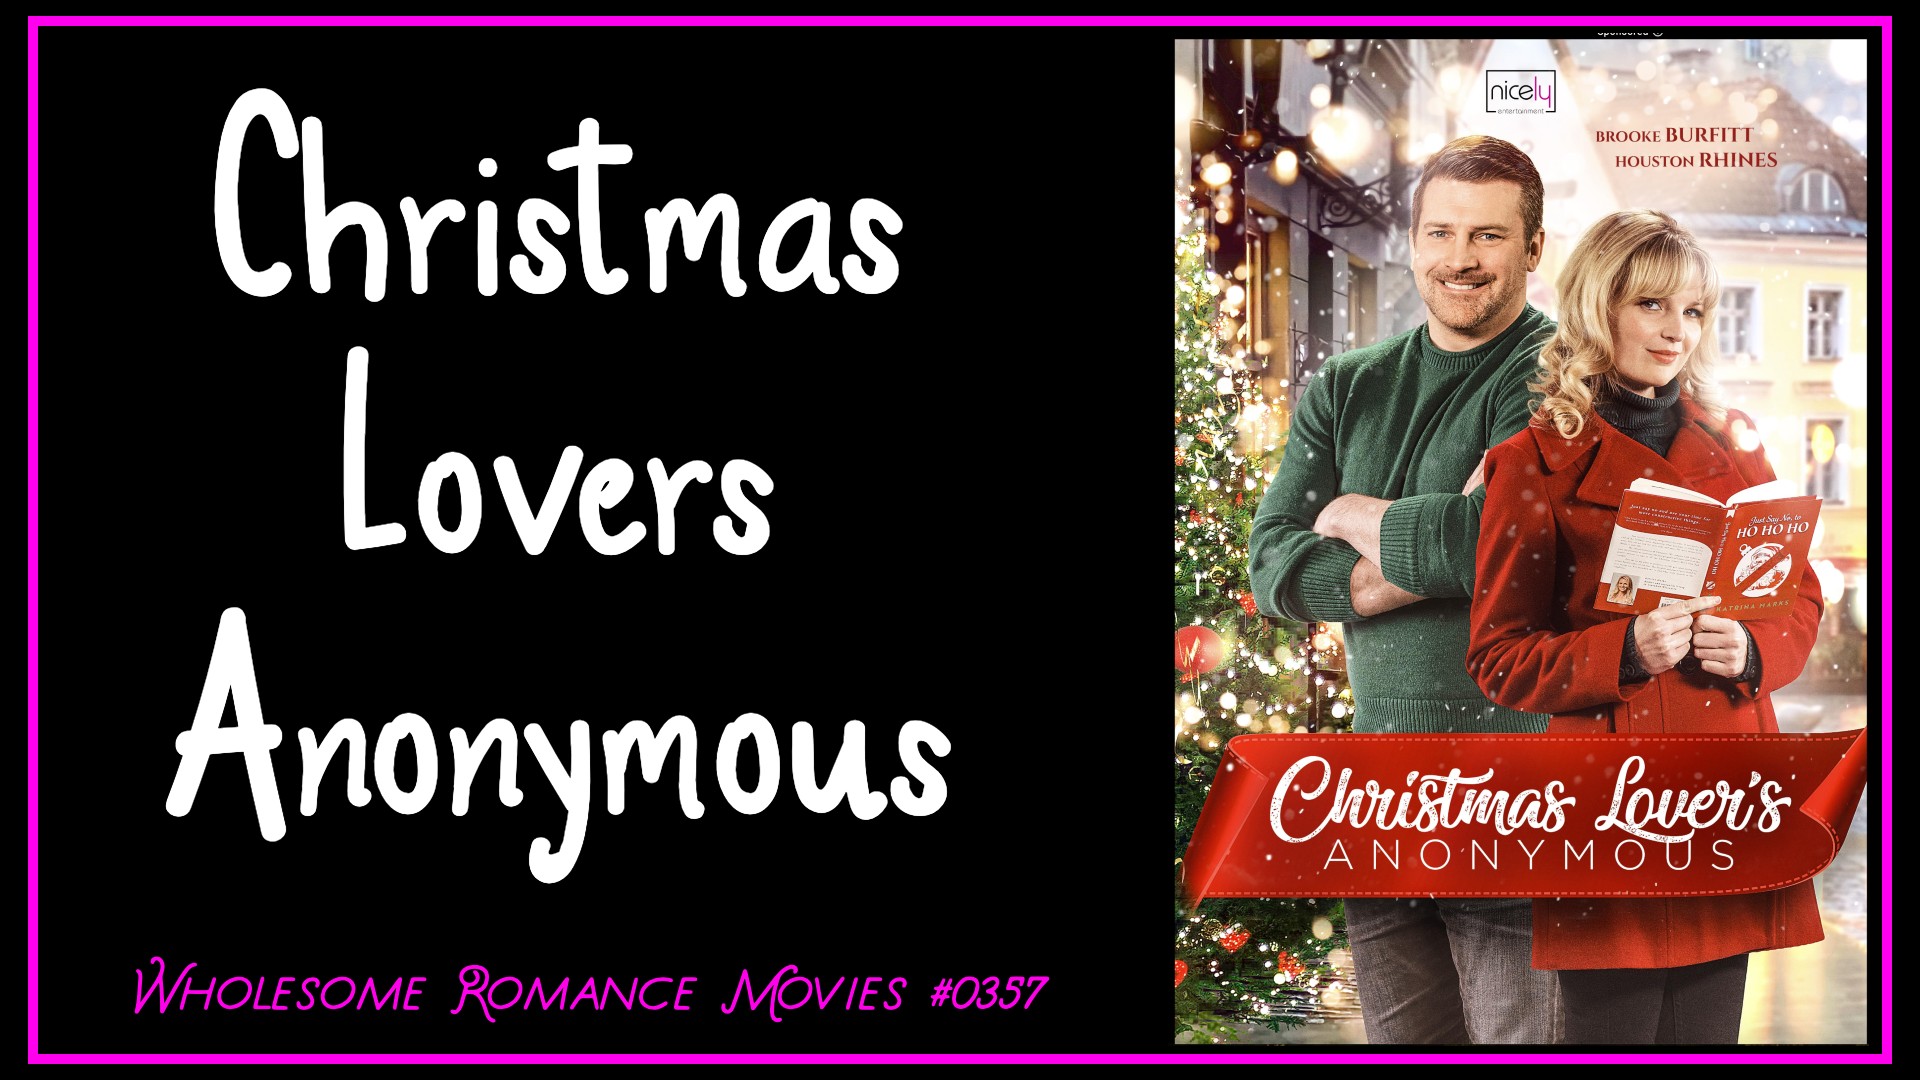 Christmas Lovers Anonymous (2021) WRM Review